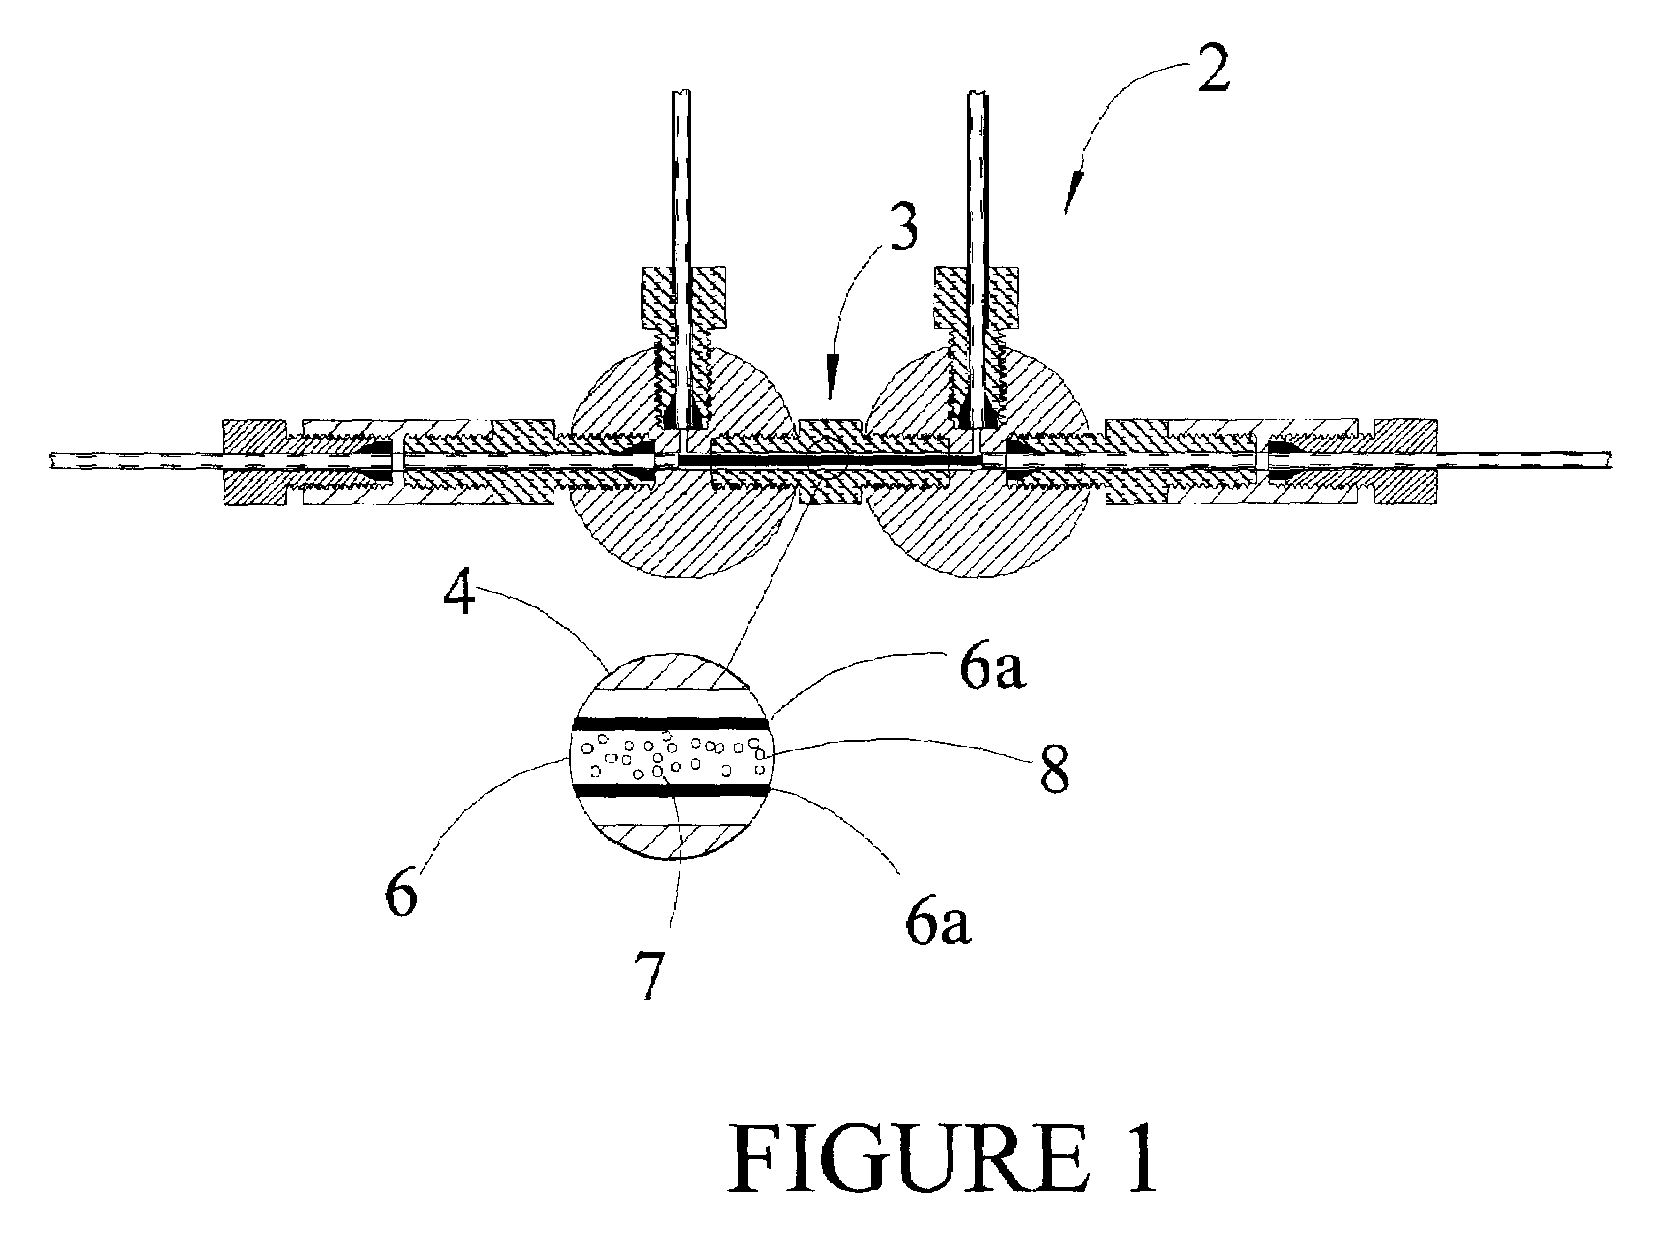 Coaxial tubular sequestering device for micro spheres and cells